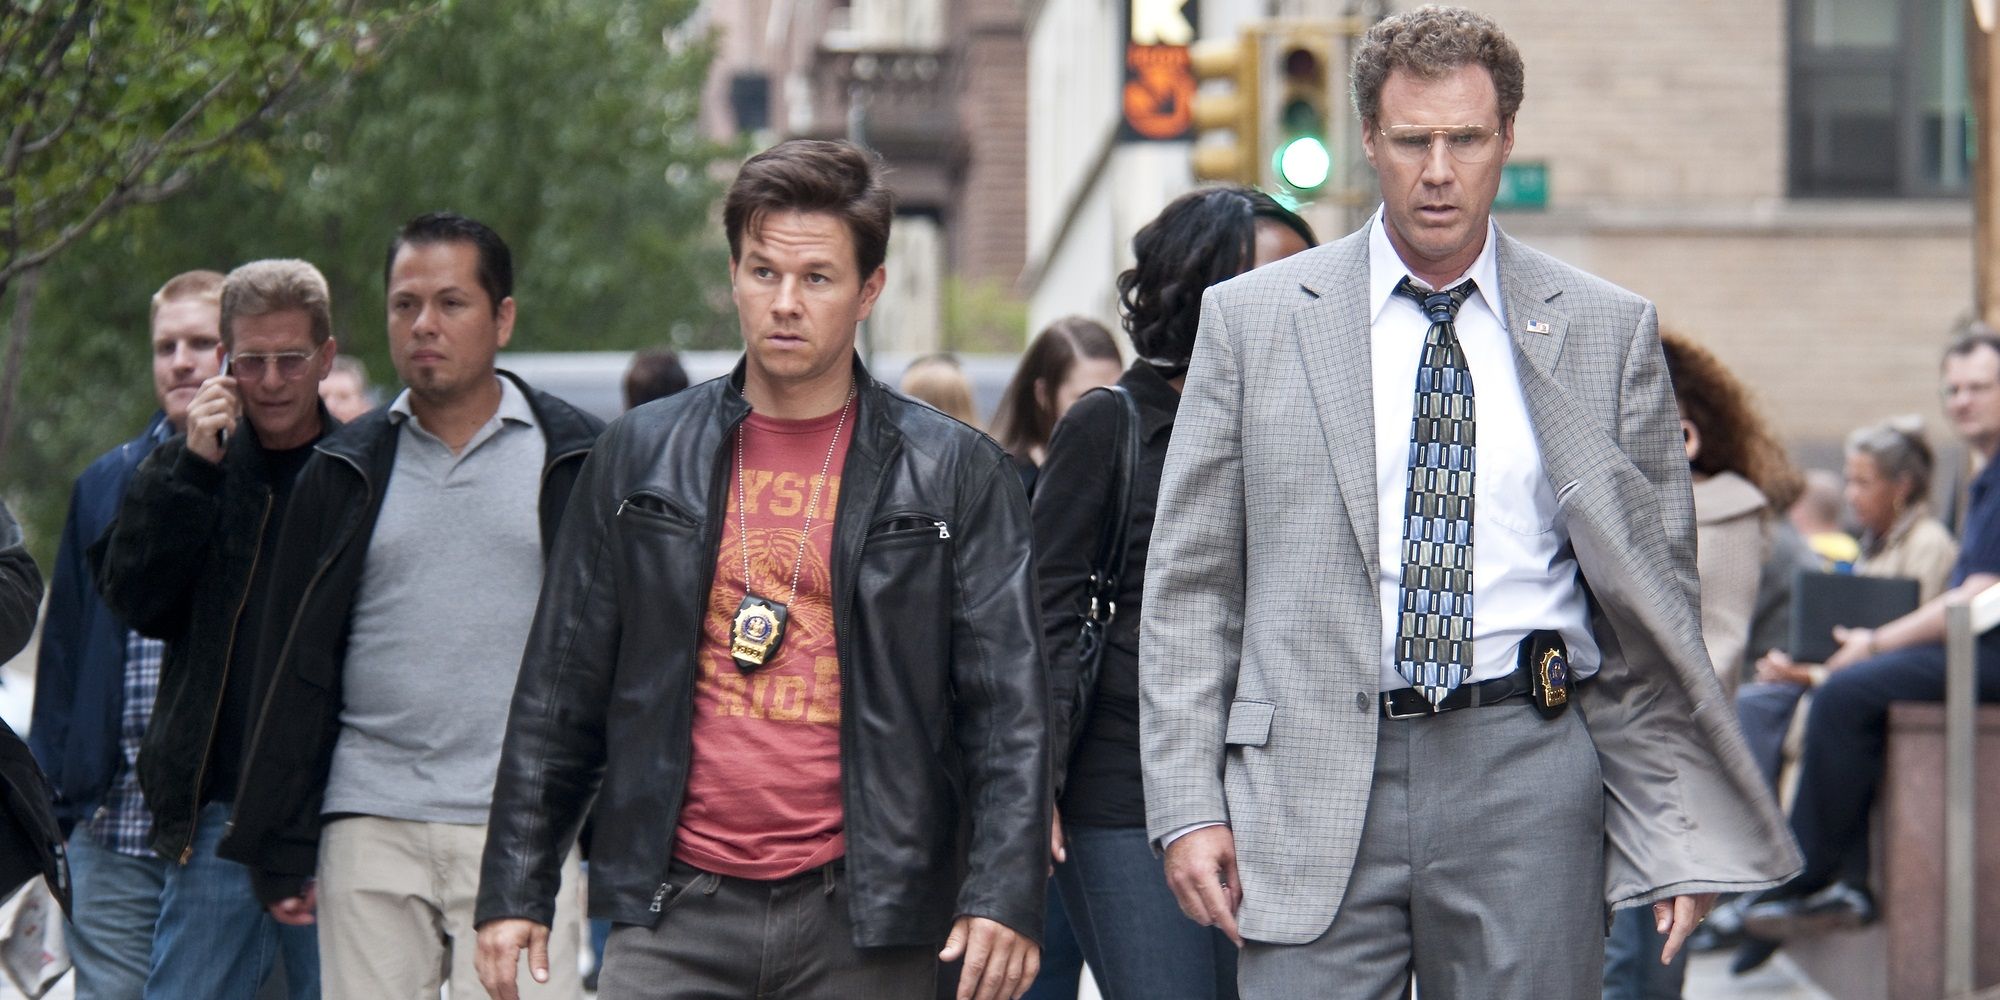 Will Ferrell and Mark Wahlberg on the street in The Other Guys.